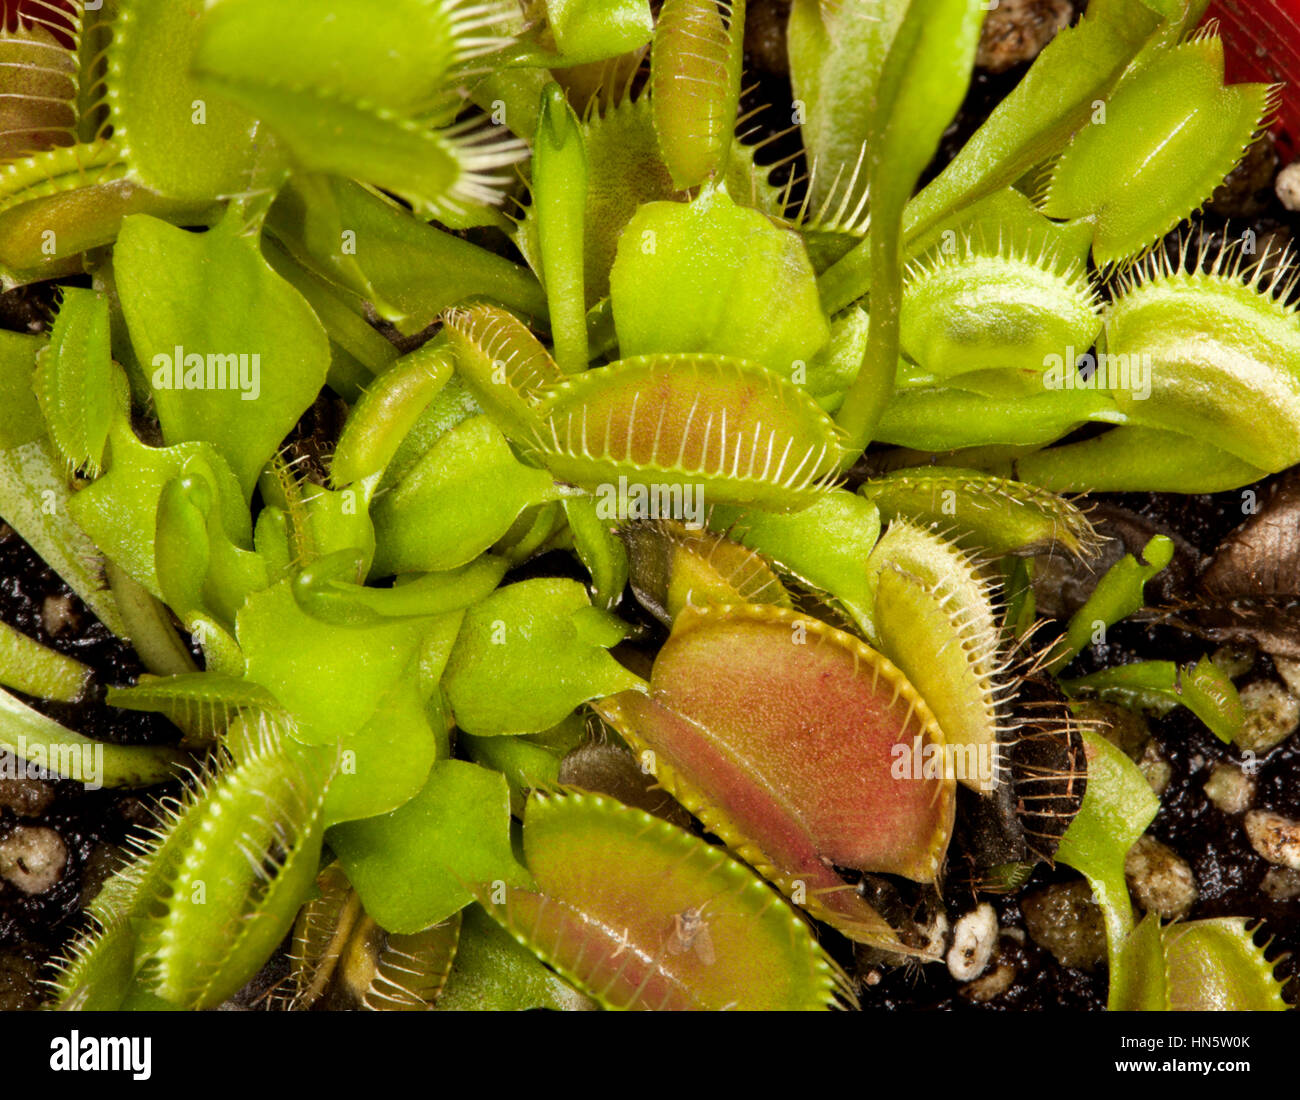 Cluster of open green and gold segments with spiny edges of Venus flytrap, Dionaea muscipula, a carnivorous insect-eating plant Stock Photo